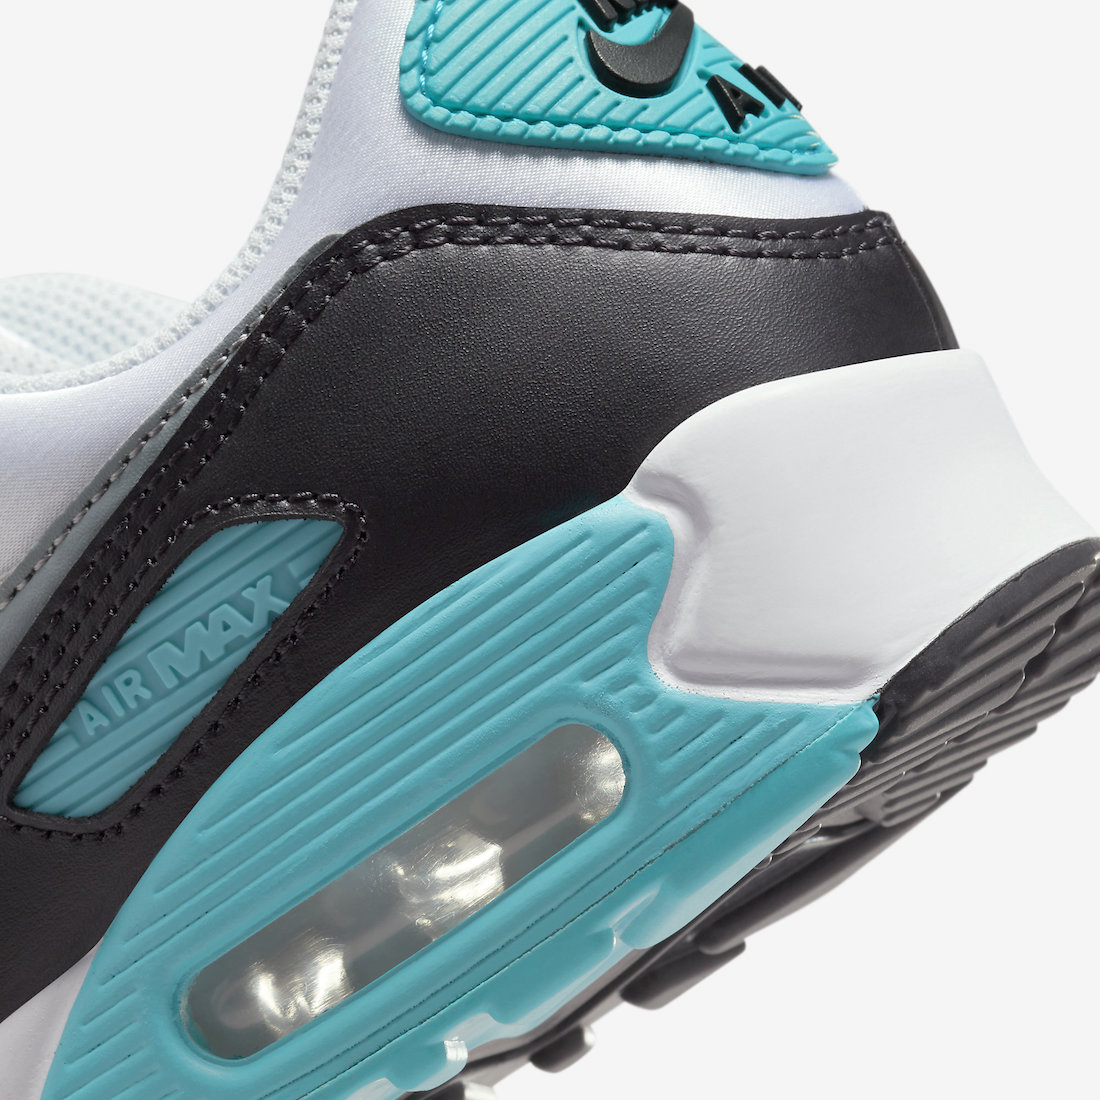 Nike Air Max 90 Teal Nebula FB8570-101 Release Date + Where to Buy ...